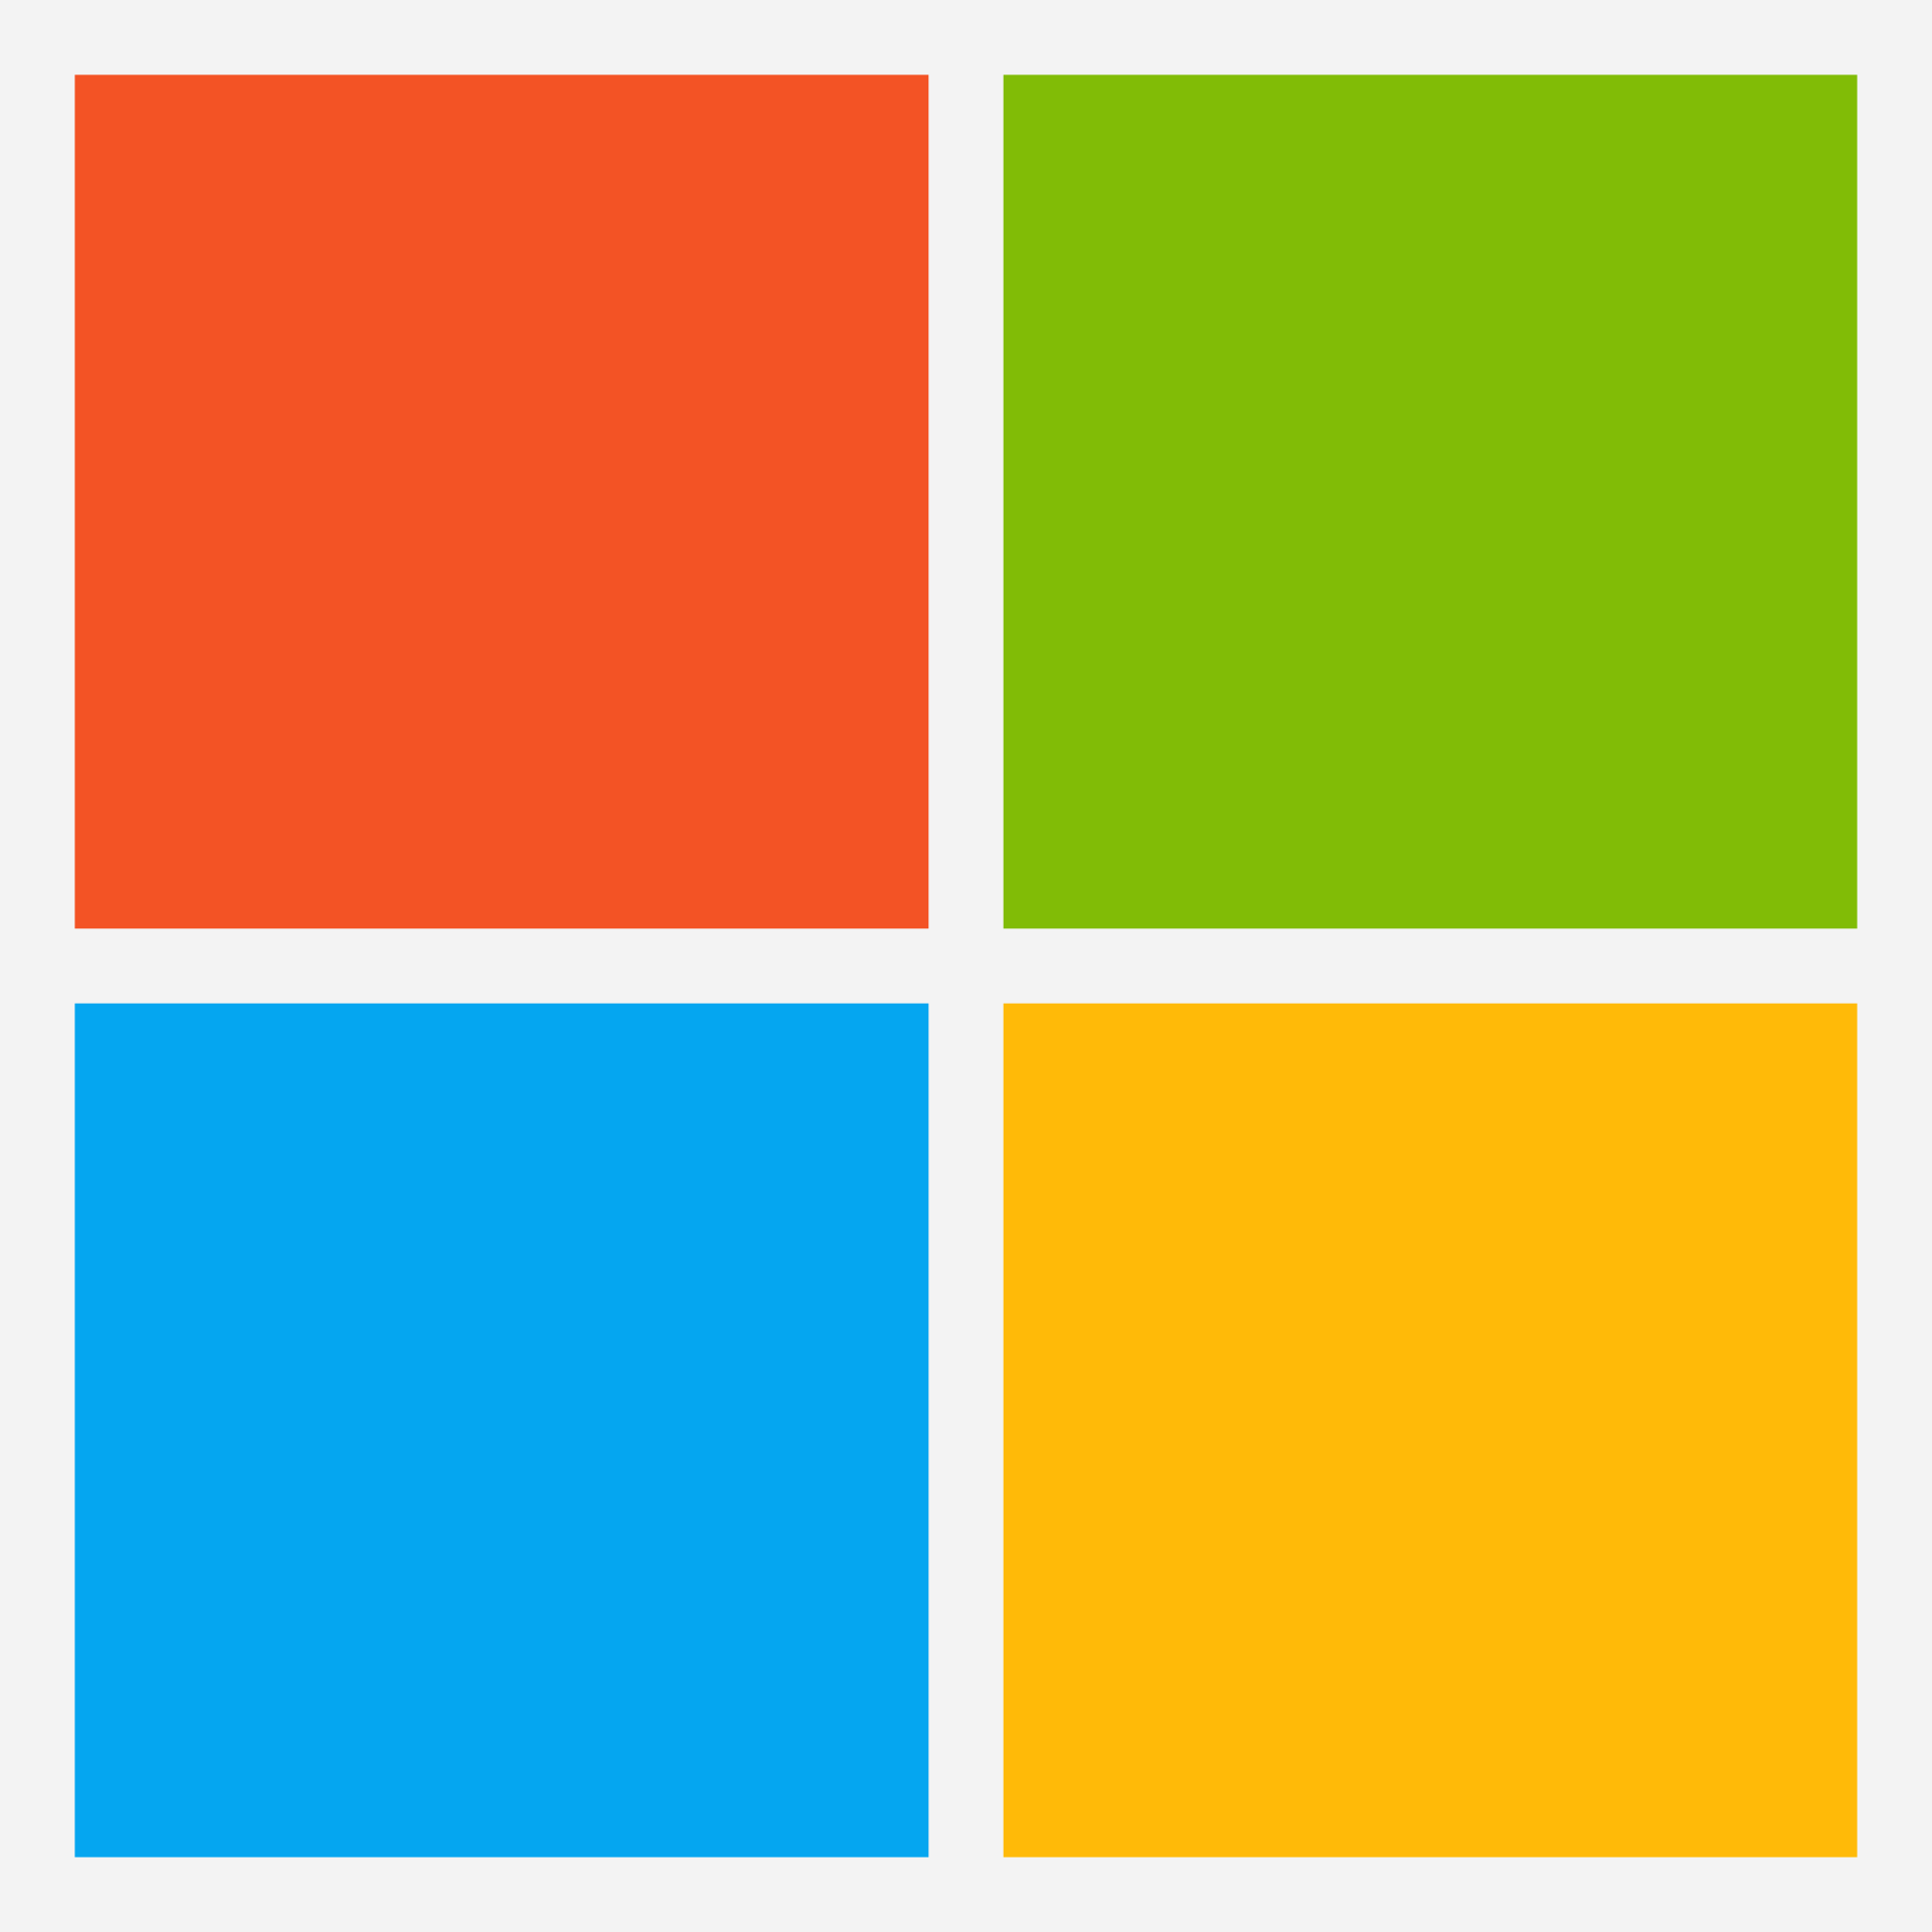 Whitelabel ITSolutions is Now Direct Peering With Microsoft